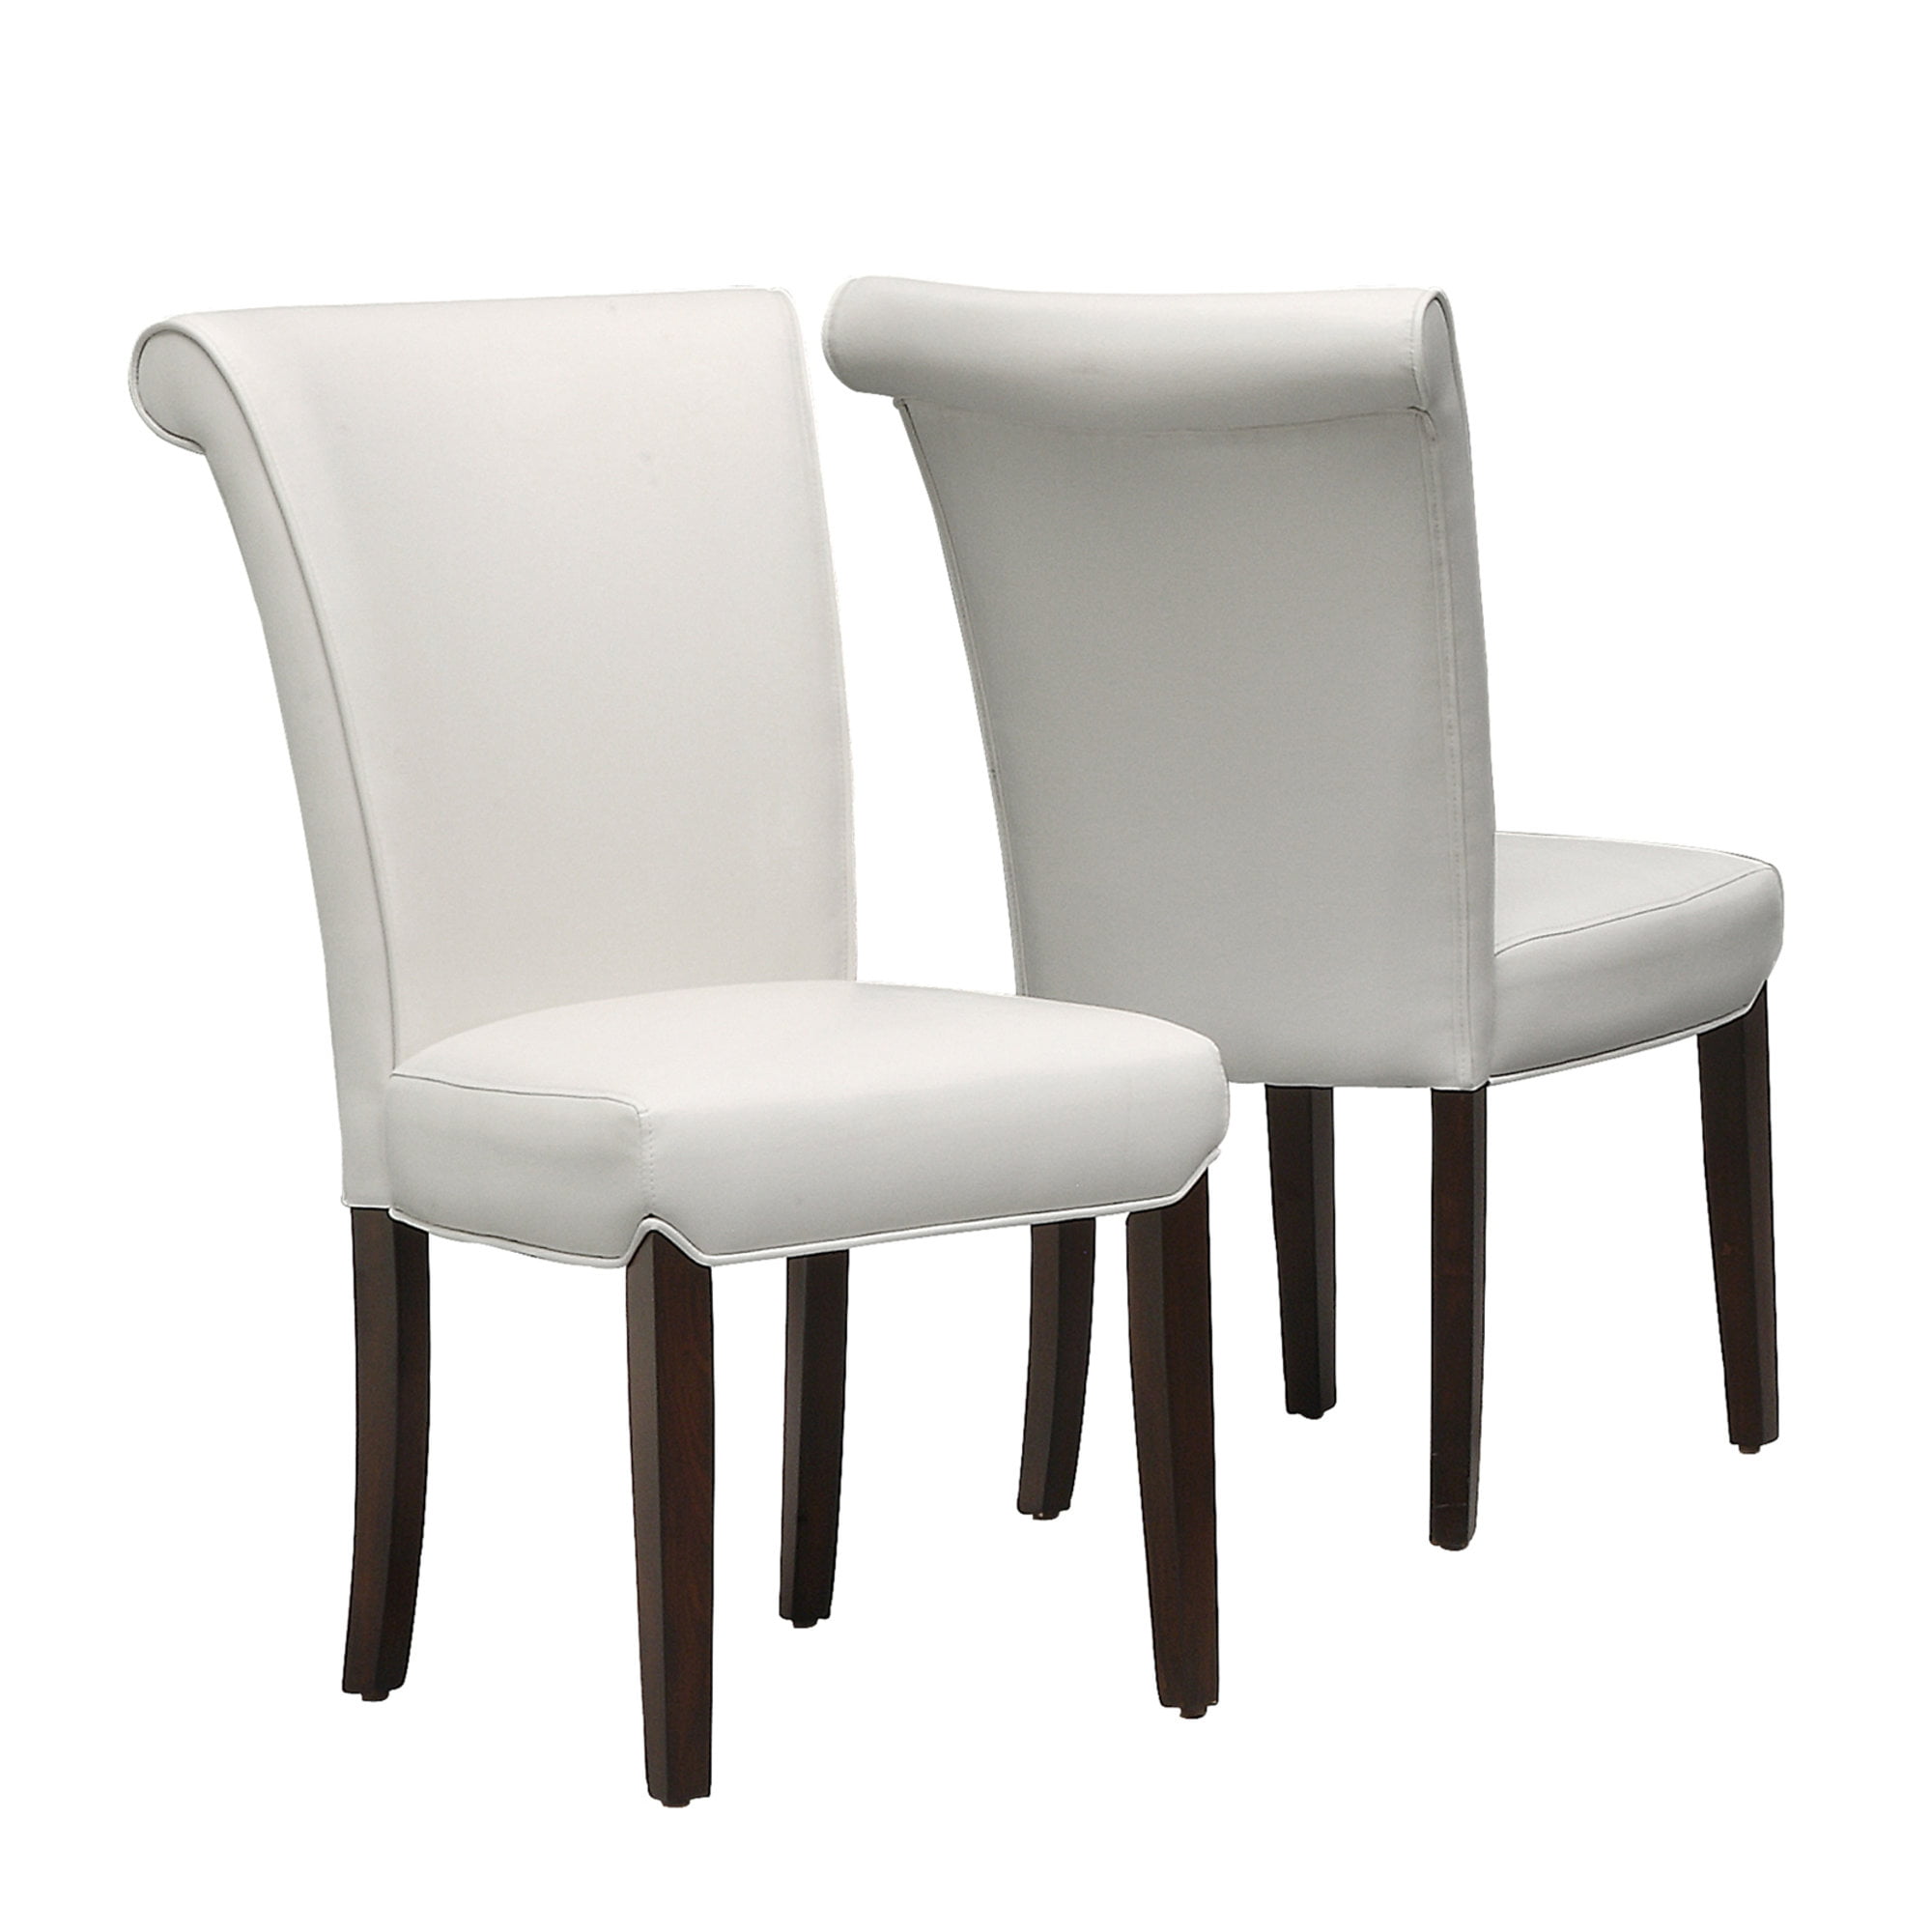 DINING CHAIR - 2PCS / 39"H / TAUPE LEATHER-LOOK-Color:Taupe - Walmart